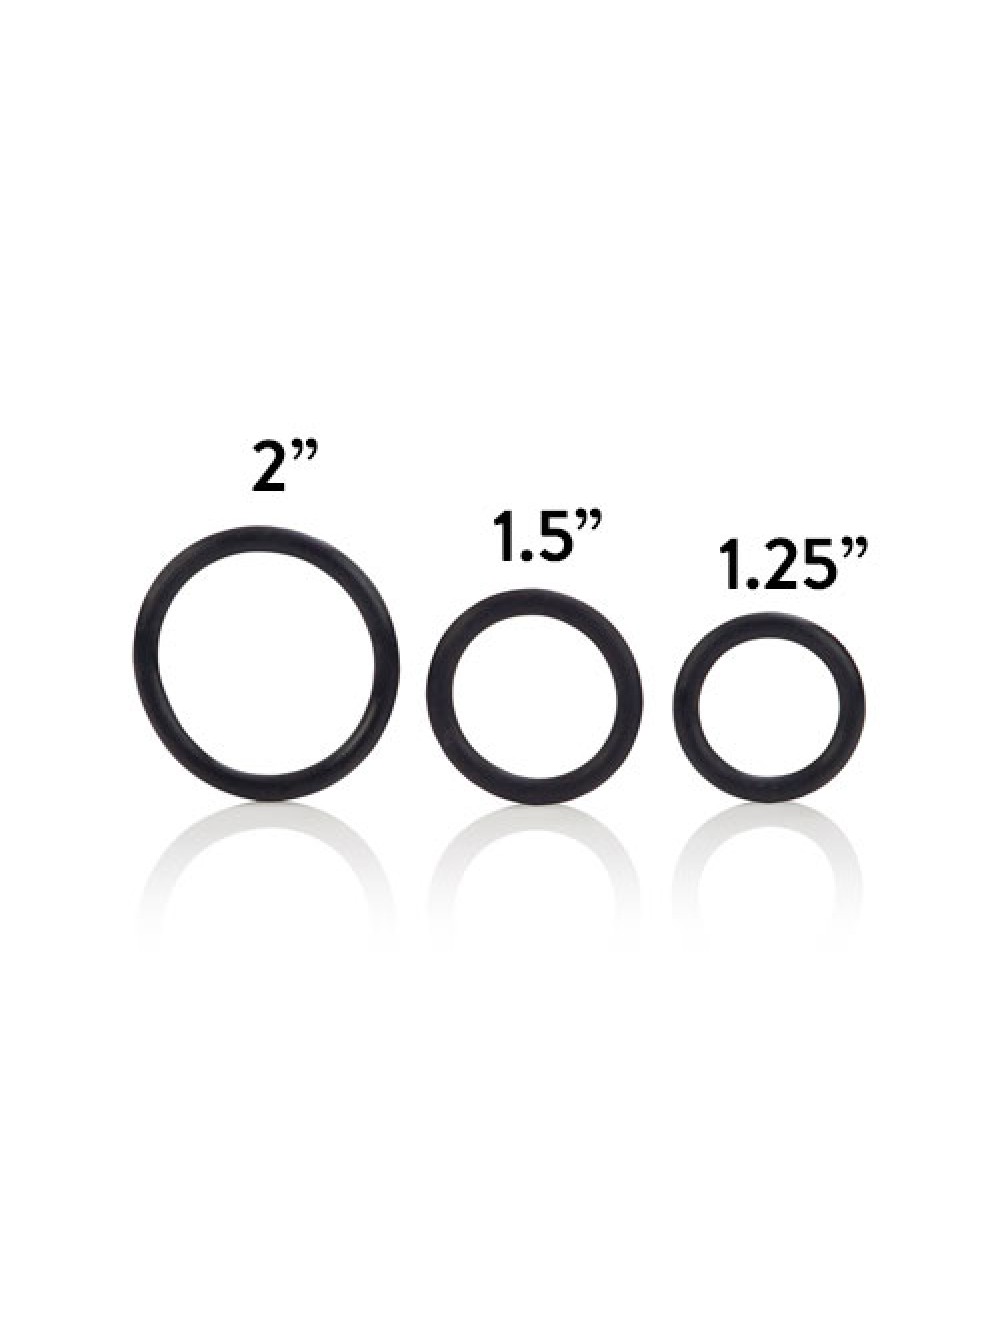 3 Piece Rubber Ring Set